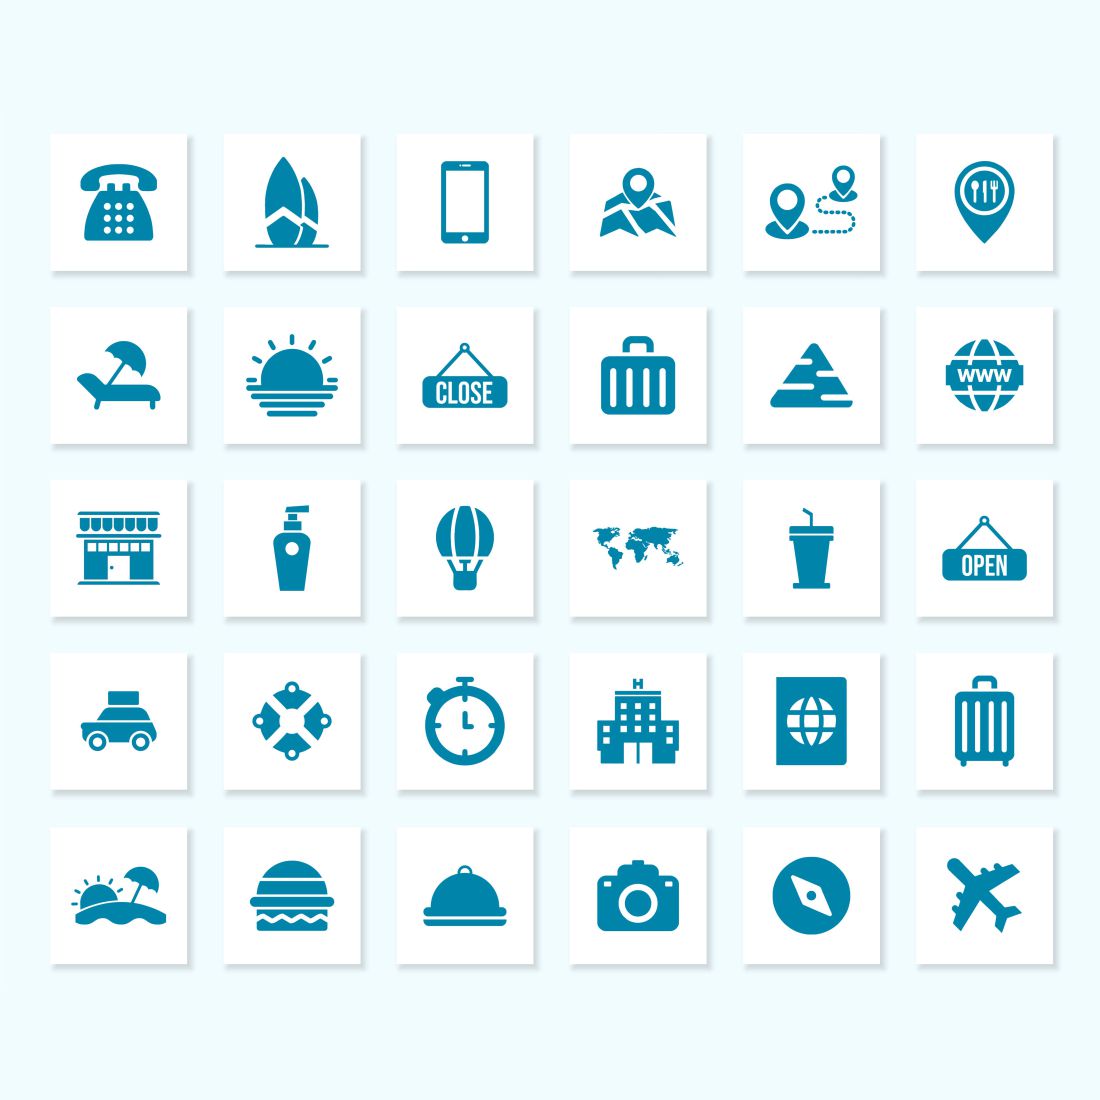 Travel Agency Instagram Canva Template Icons.